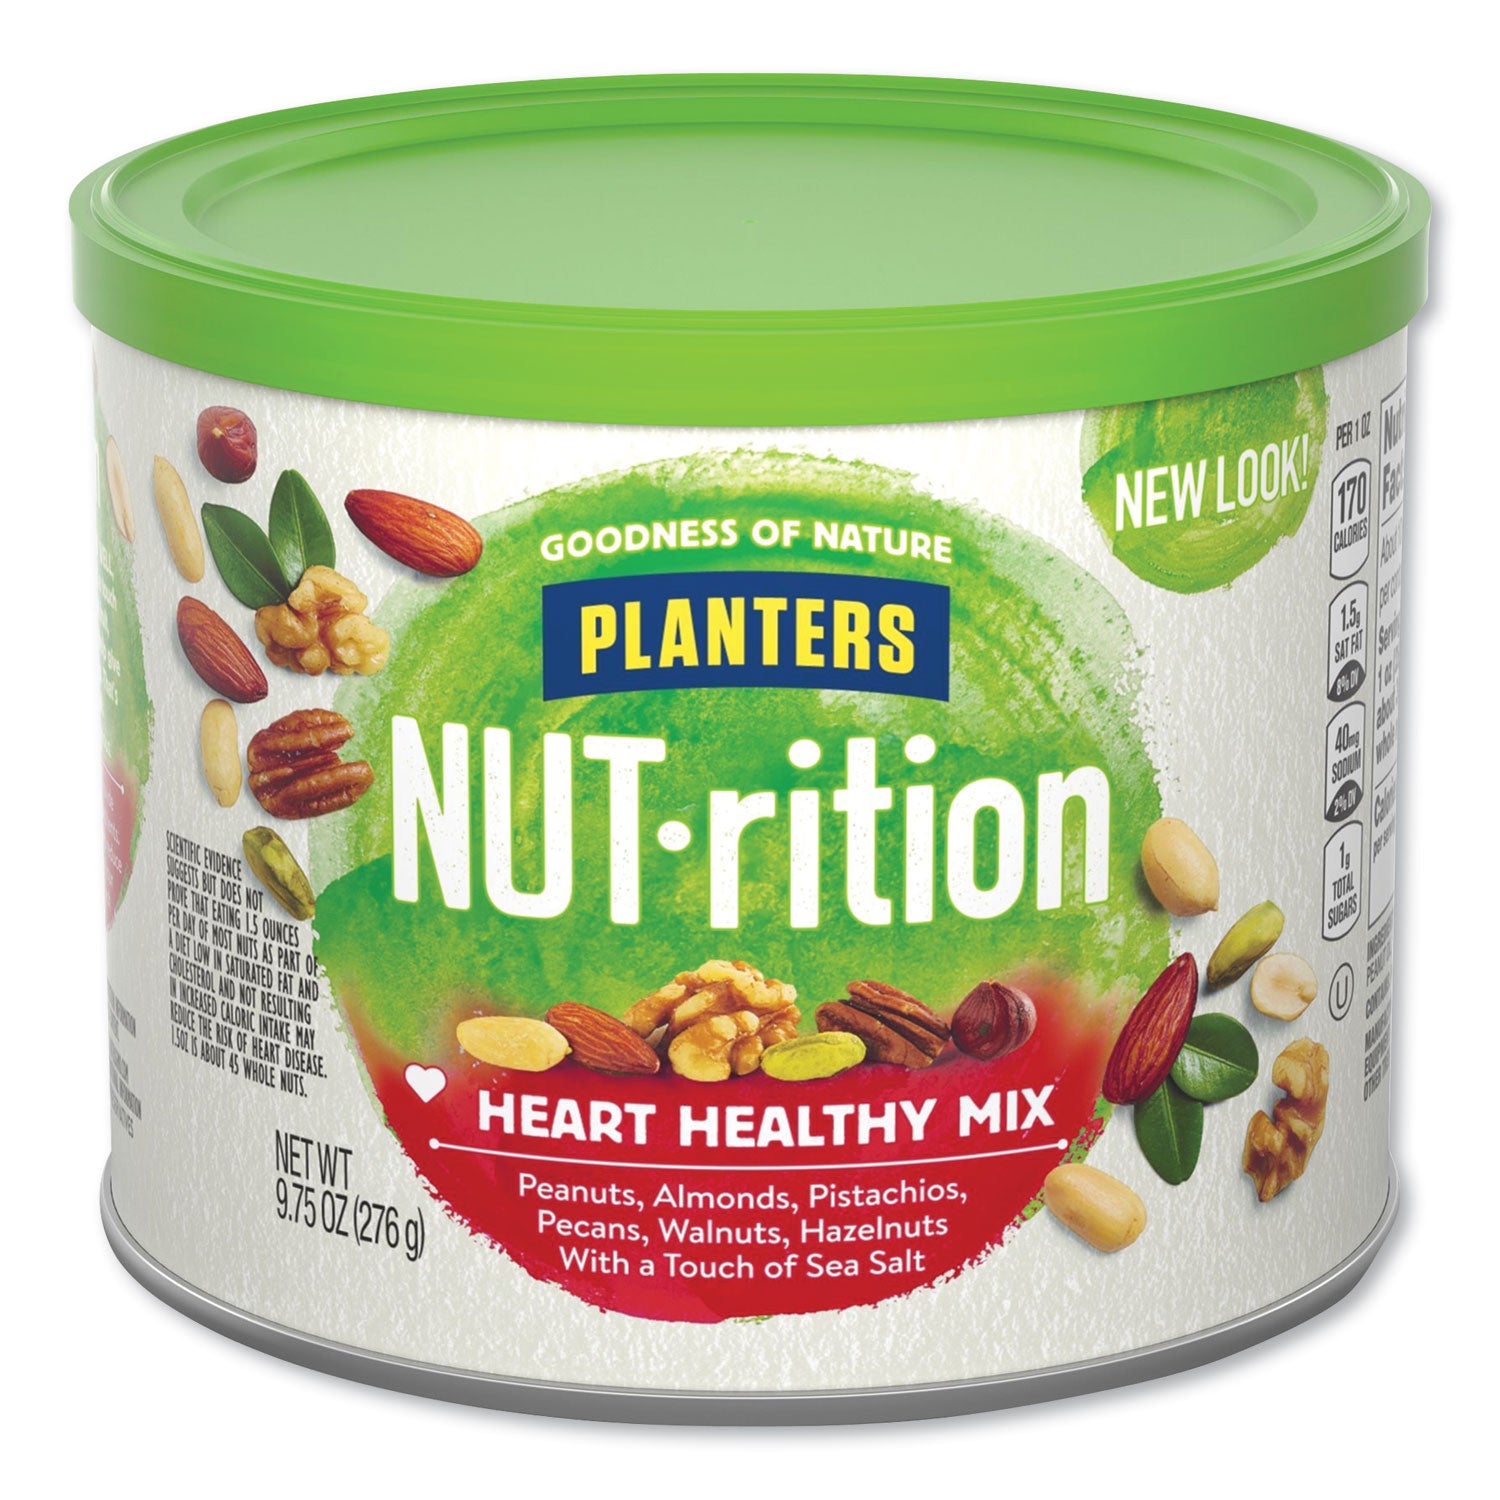 nut-rition-heart-healthy-mix-975-oz-can_ptn05957 - 1